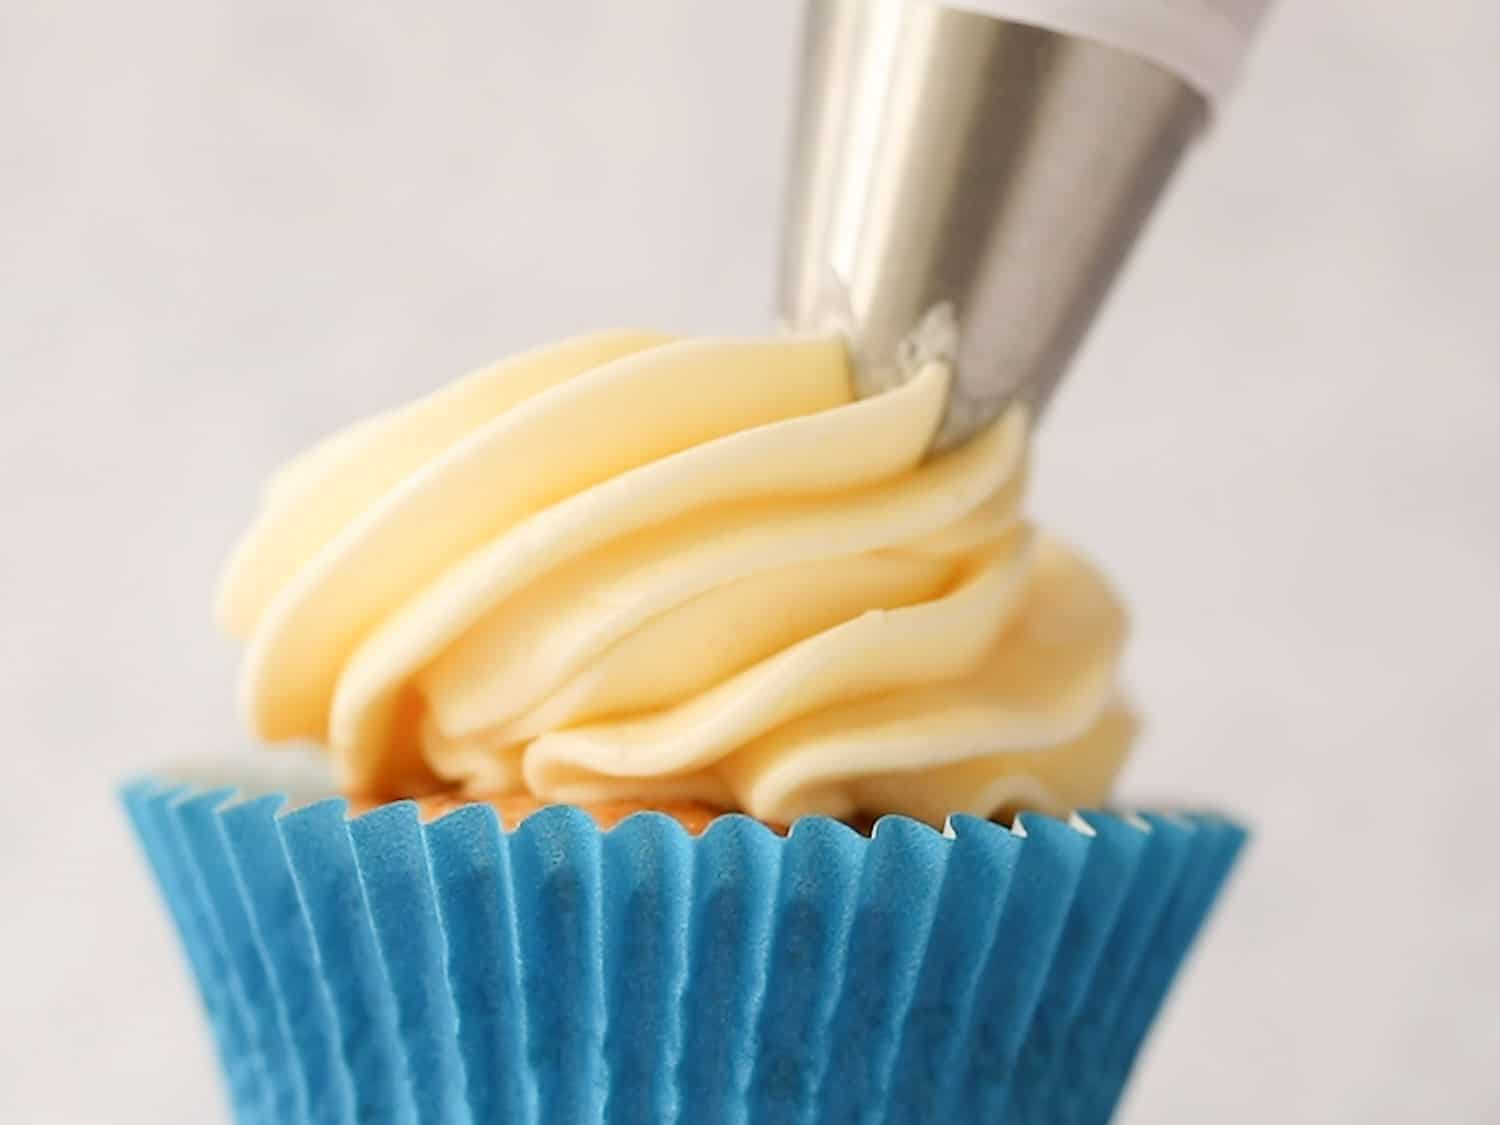 A cupcake in a blue case being decorated with buttercream